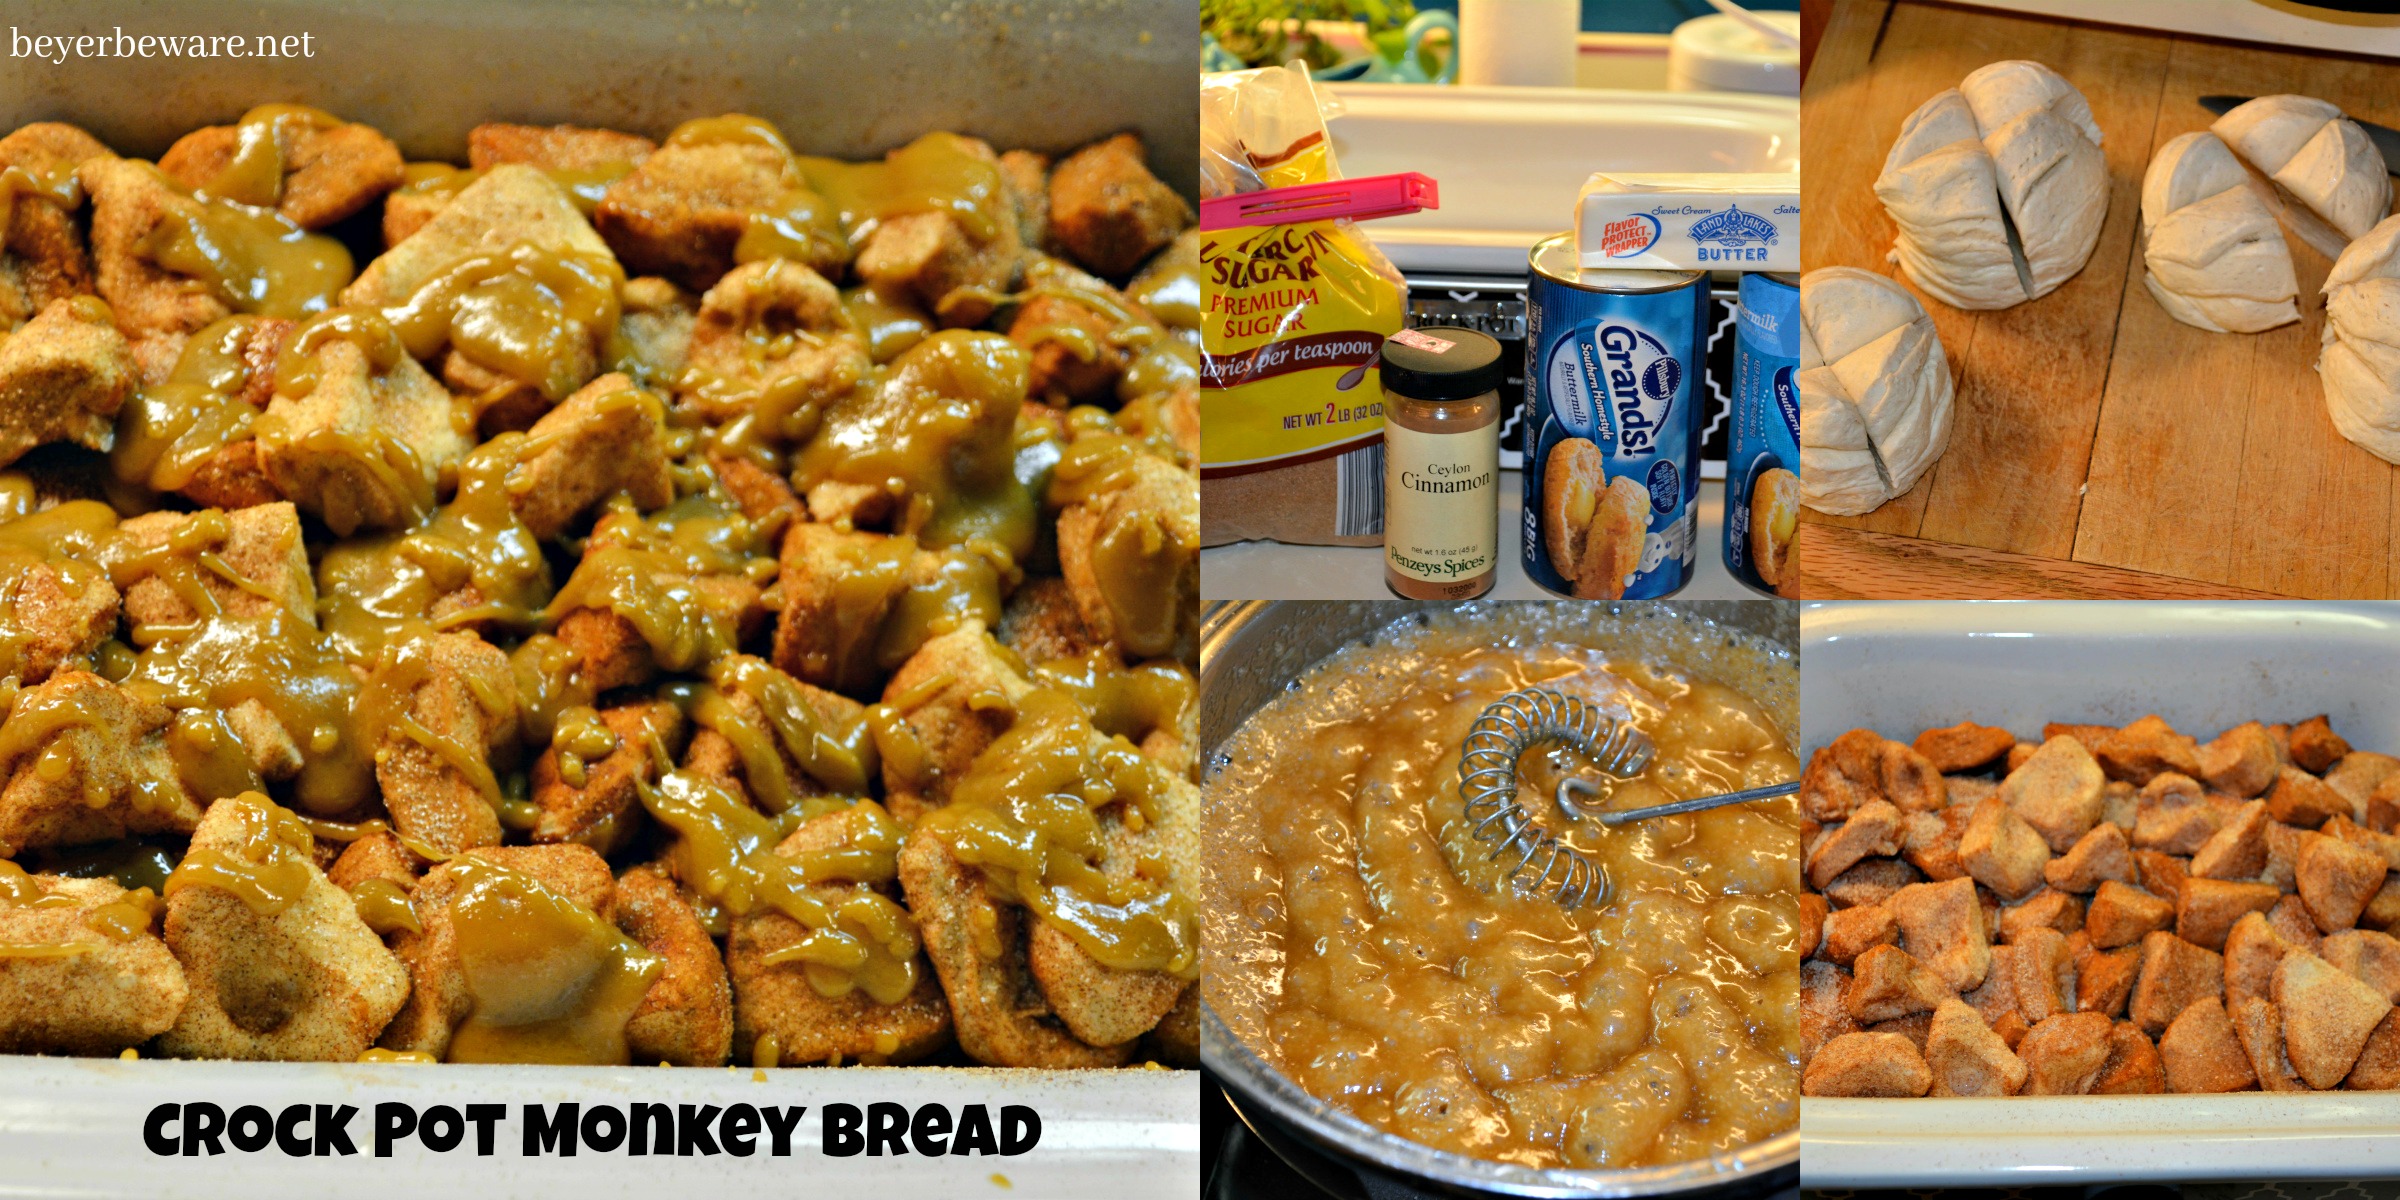 Five simple ingredients combined in a casserole crock pot and you are two hours away from this gooey crock pot monkey bread.